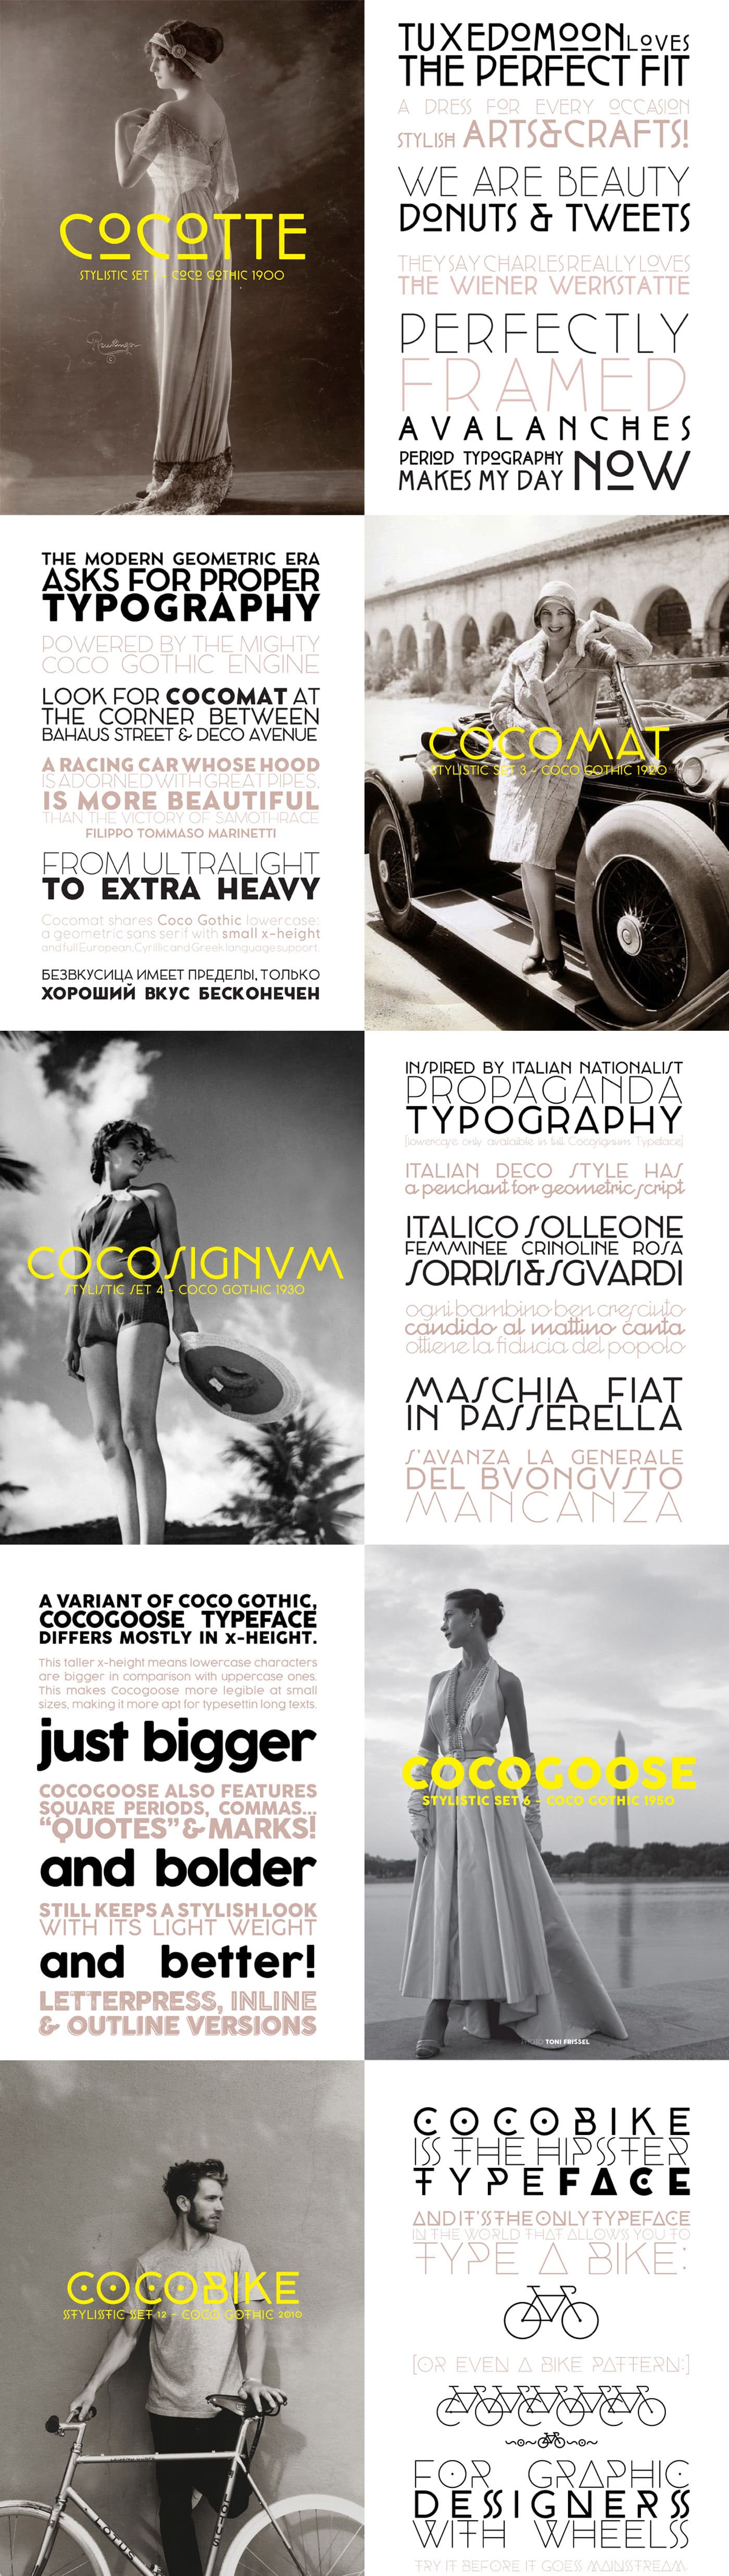 Free Font Friday: Coco-Gothic - Sessions College for Professional Design 3